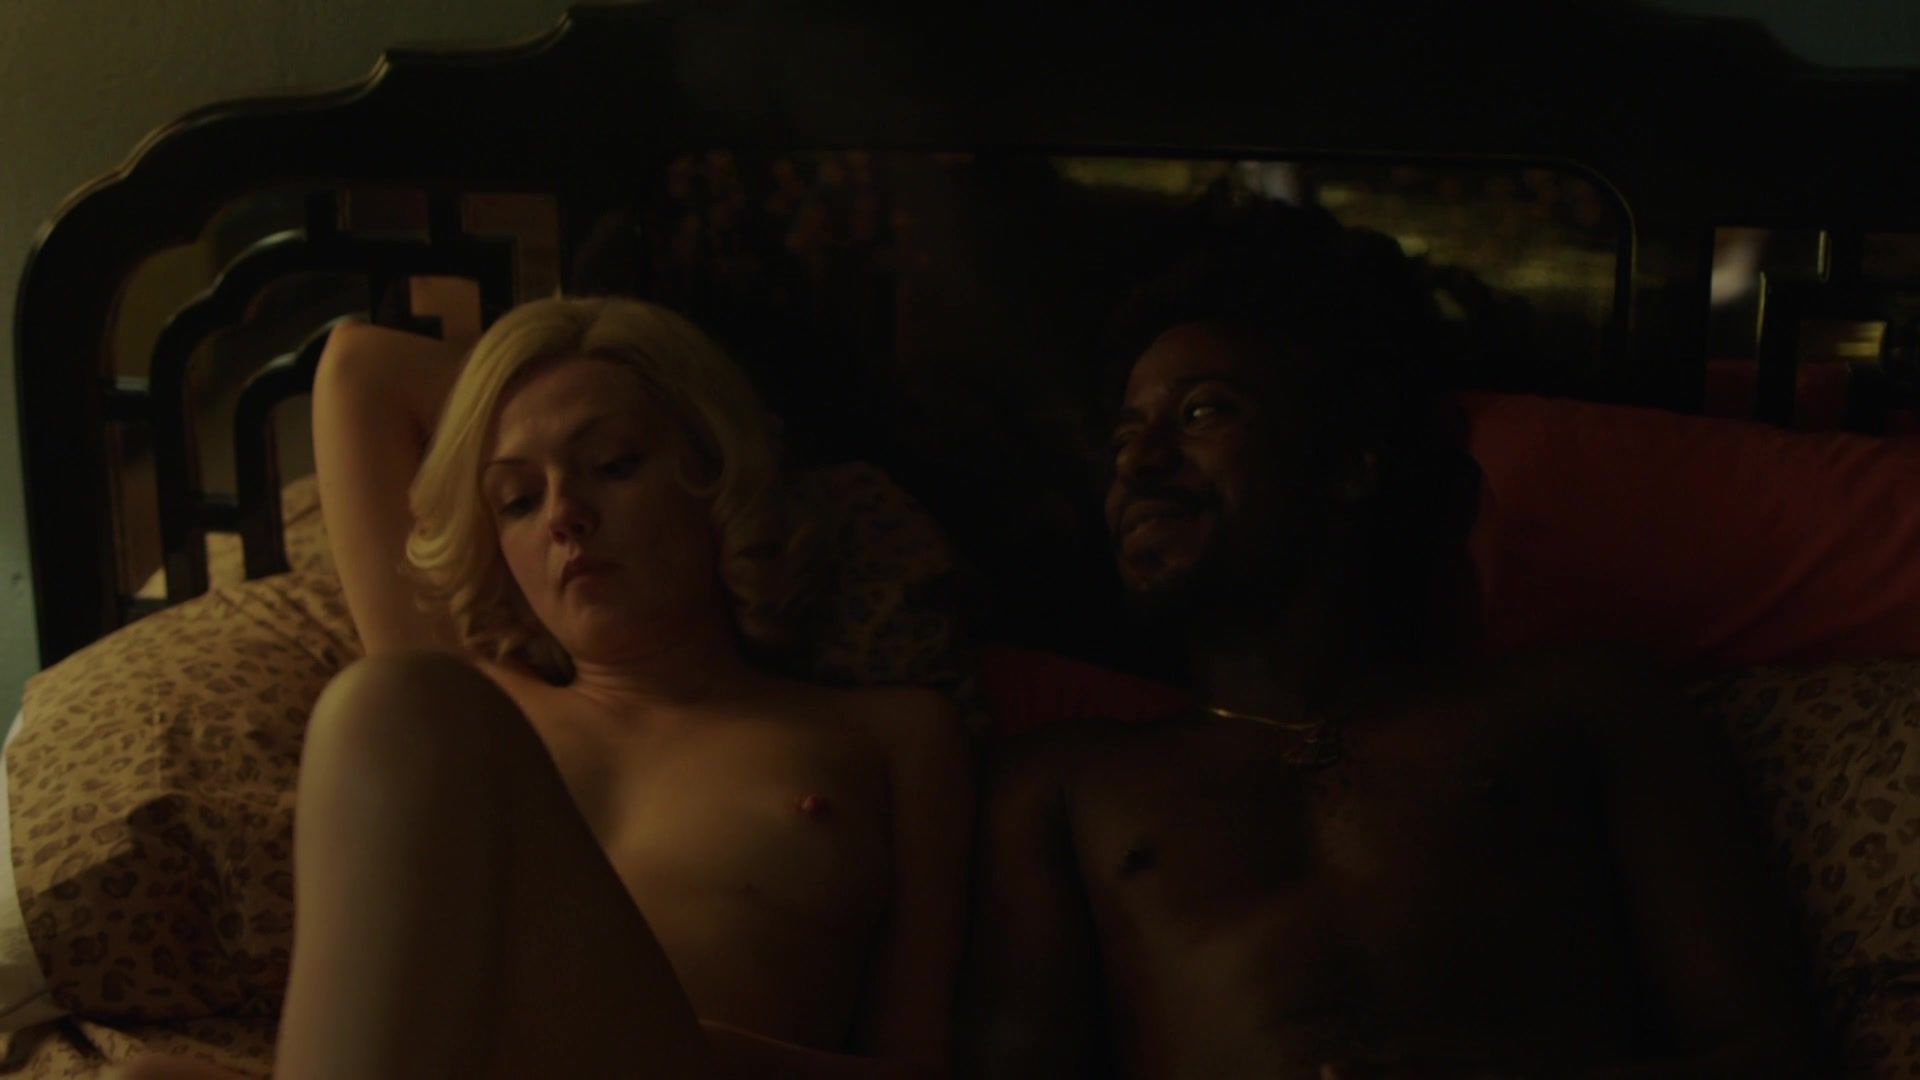 Officesex Emily Meade nude - The Deuce s02e05 (2018) Dancing - 1